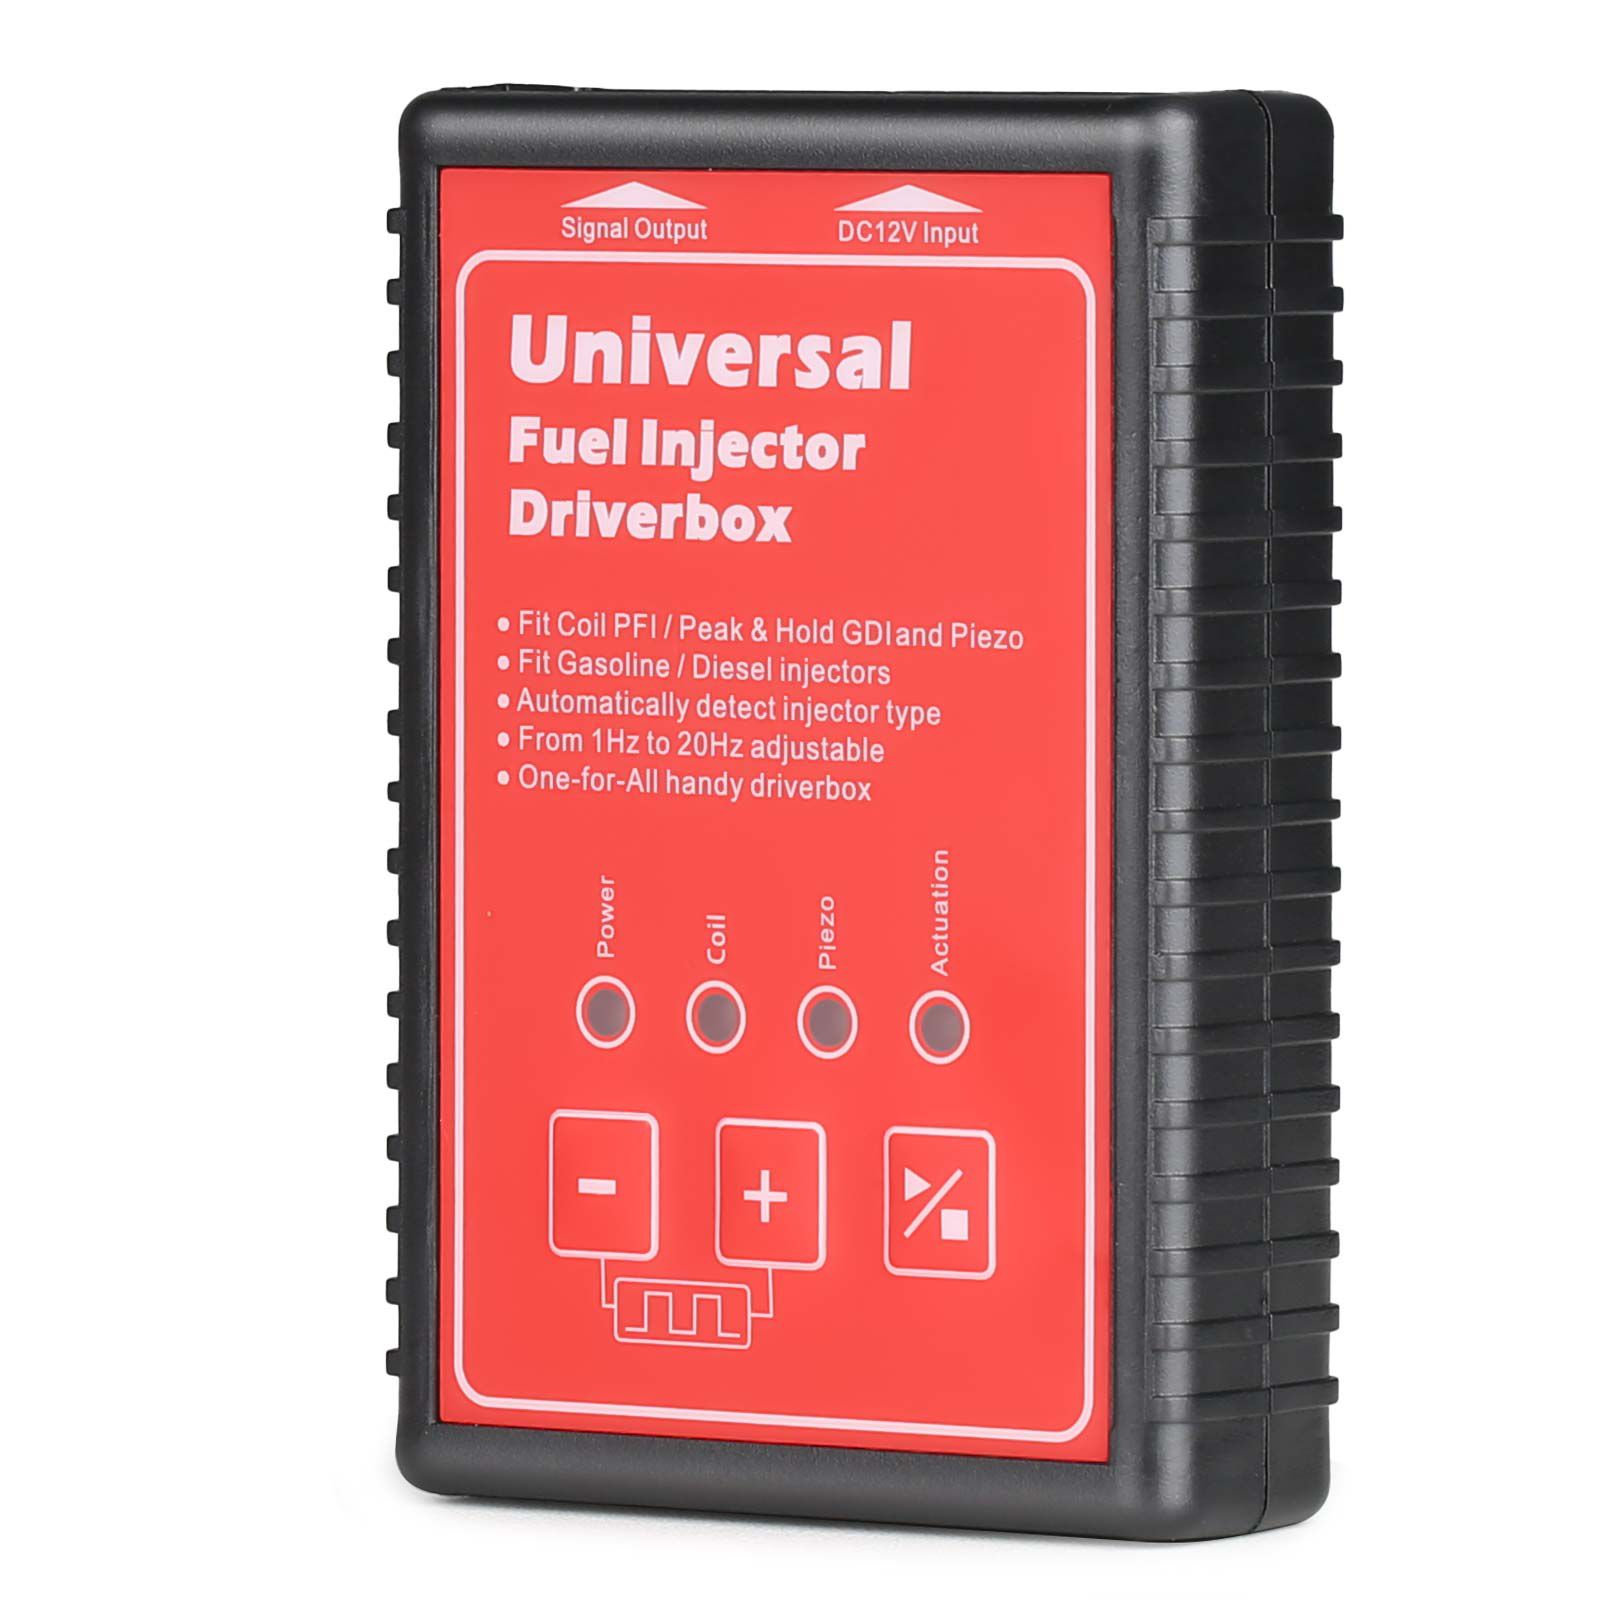 GD1 Universal Fuel Injector Drivebox Fit All Kinds of Injector Interface Automatically Detect Injector Type